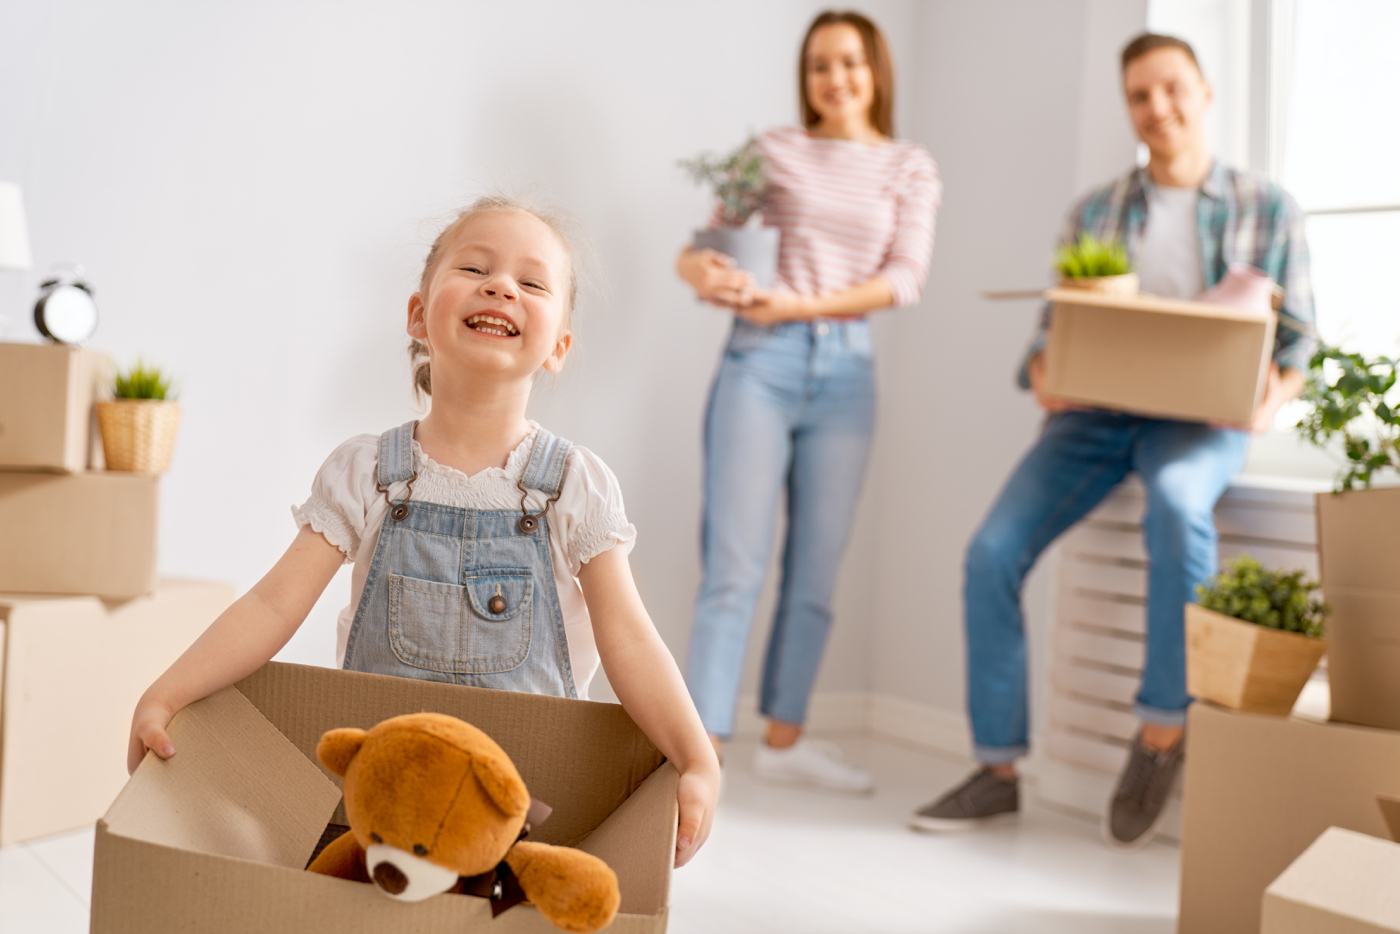 Organize packing furniture and plants and toys in cartons